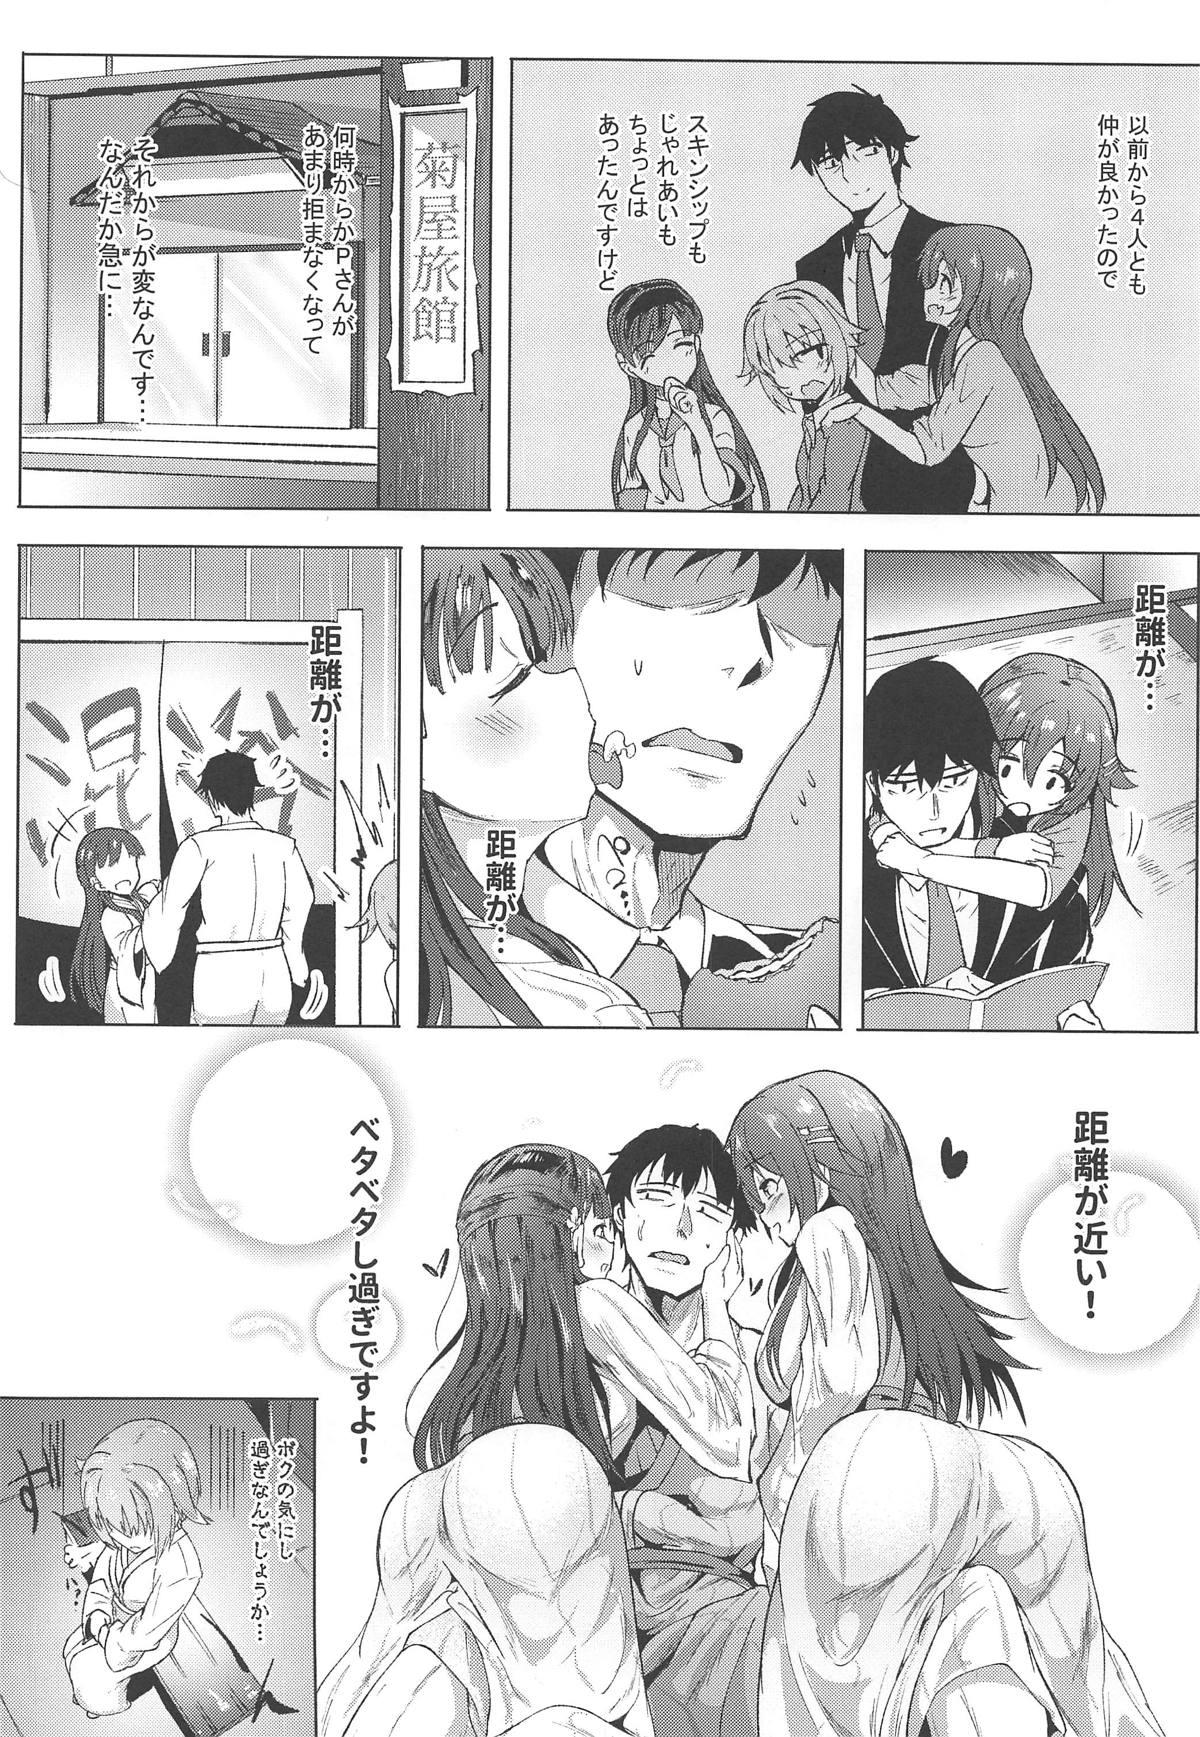 Soapy KBYD to 4P Suru Hon + Omakebon - The idolmaster Hot Girls Getting Fucked - Page 3